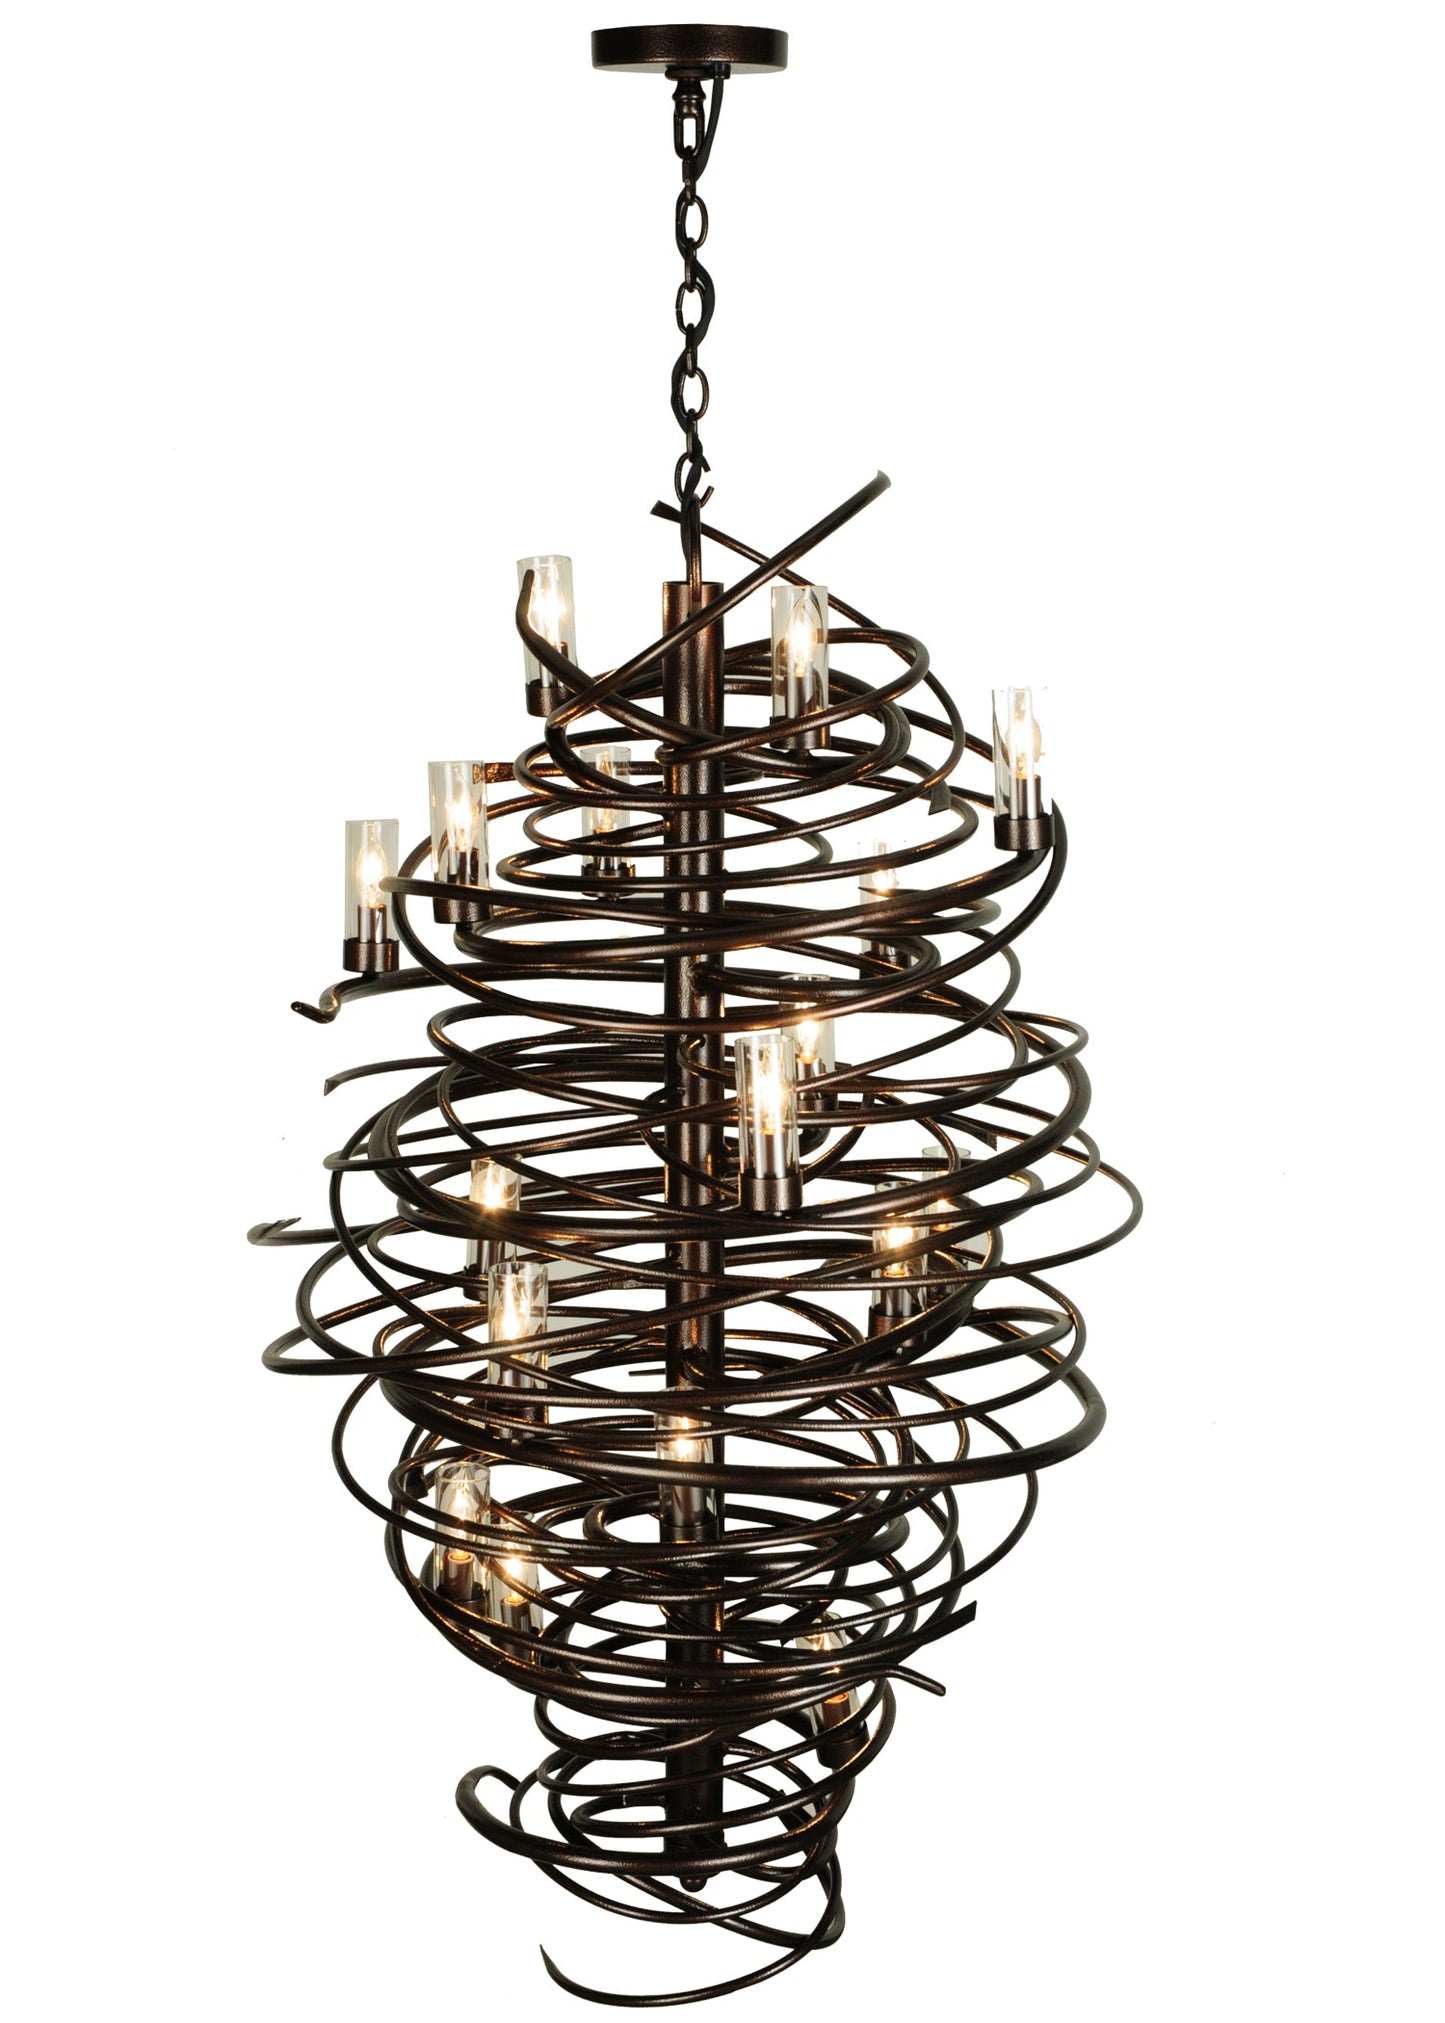 30" Centric 18-Light Chandelier by 2nd Ave Lighting